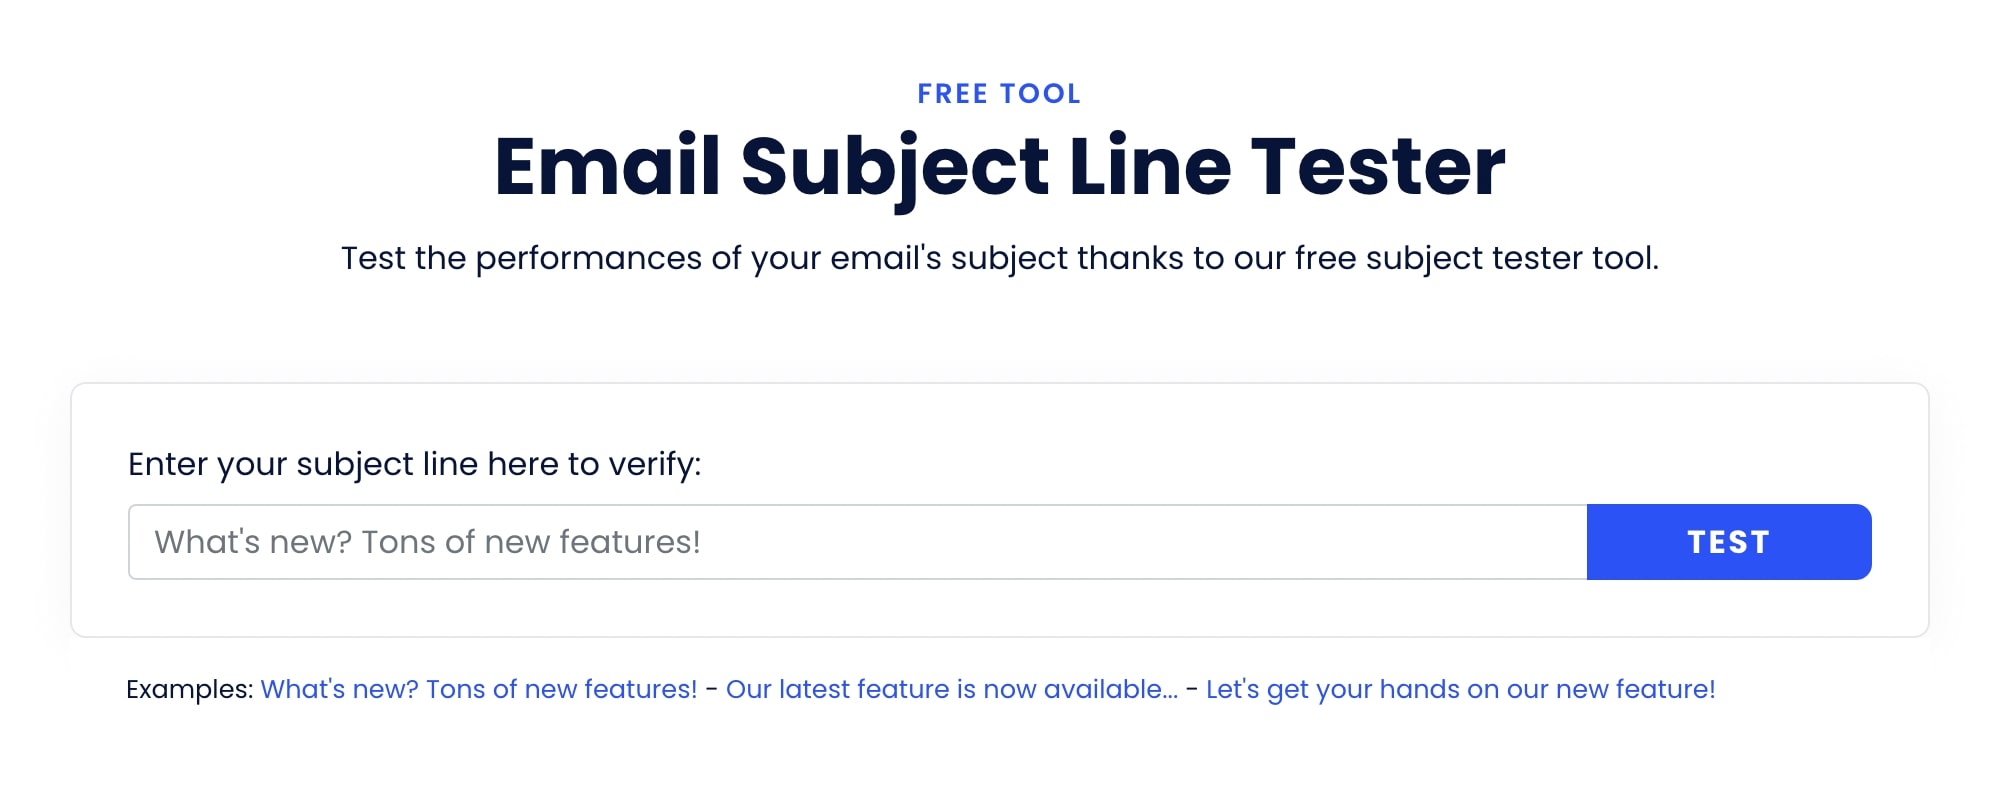 Follow-up email subject line tester